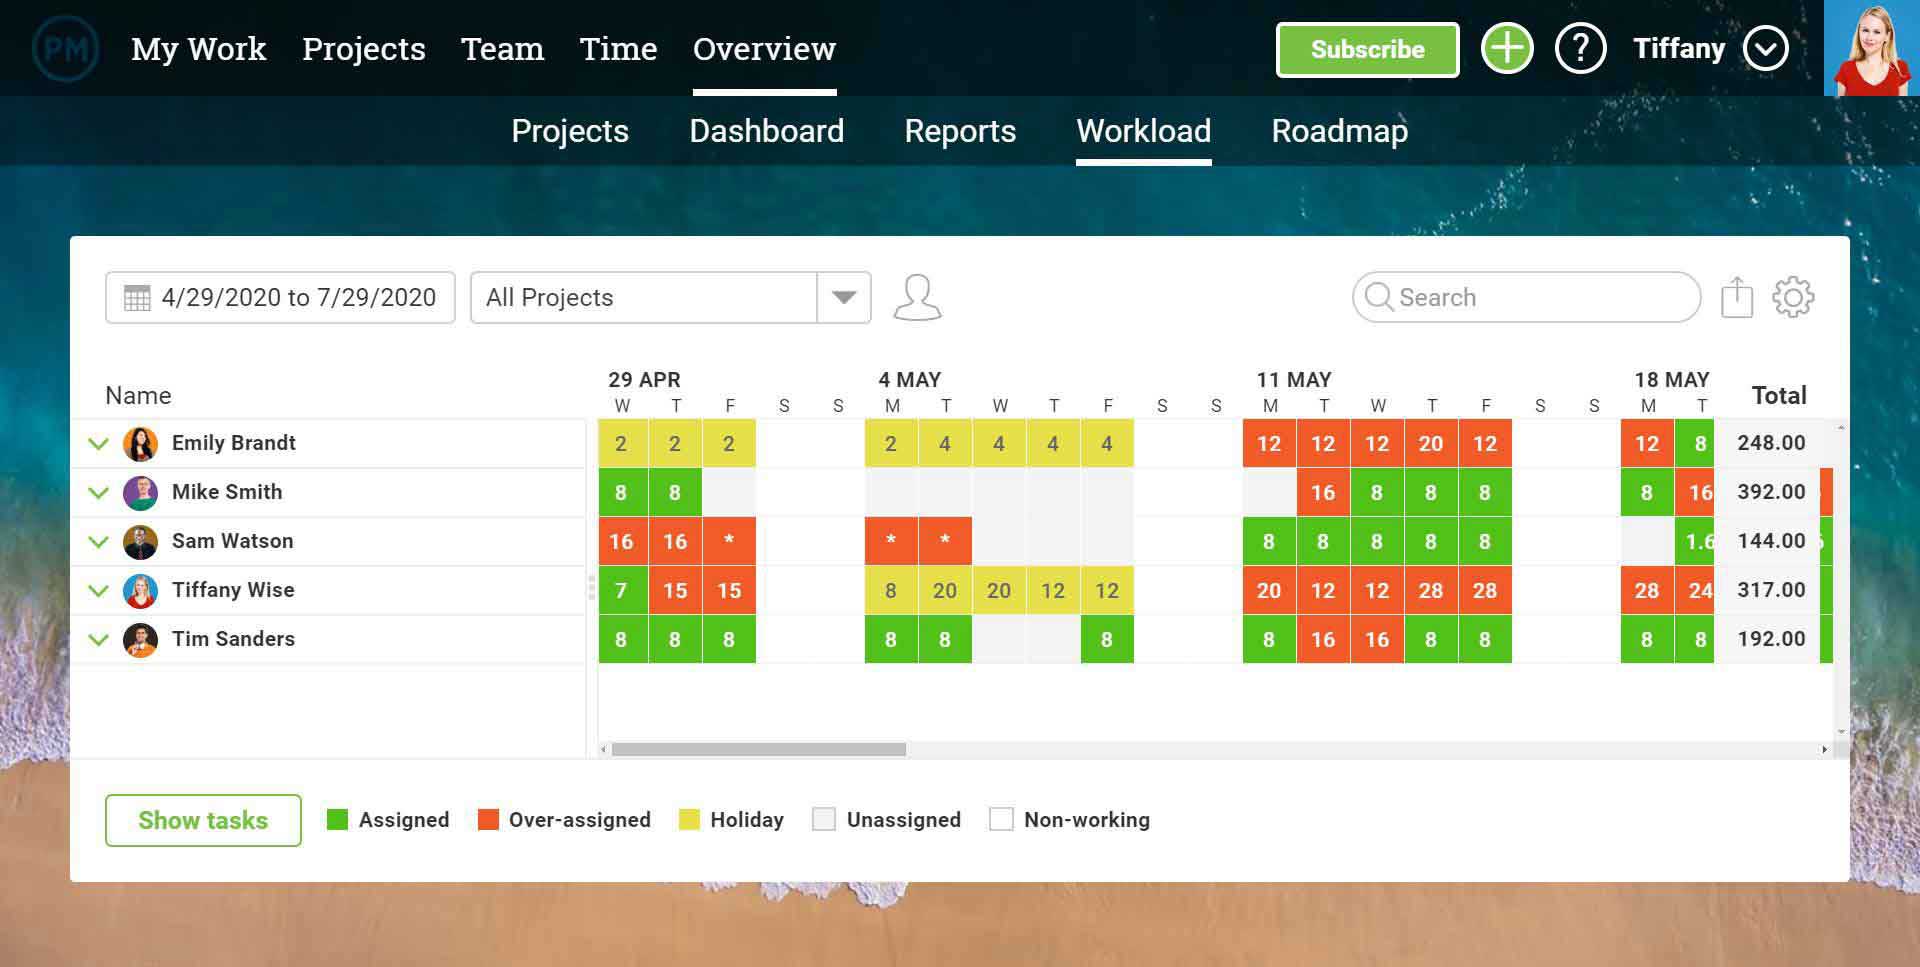 A screenshot of the overview workload page in ProjectManager.com